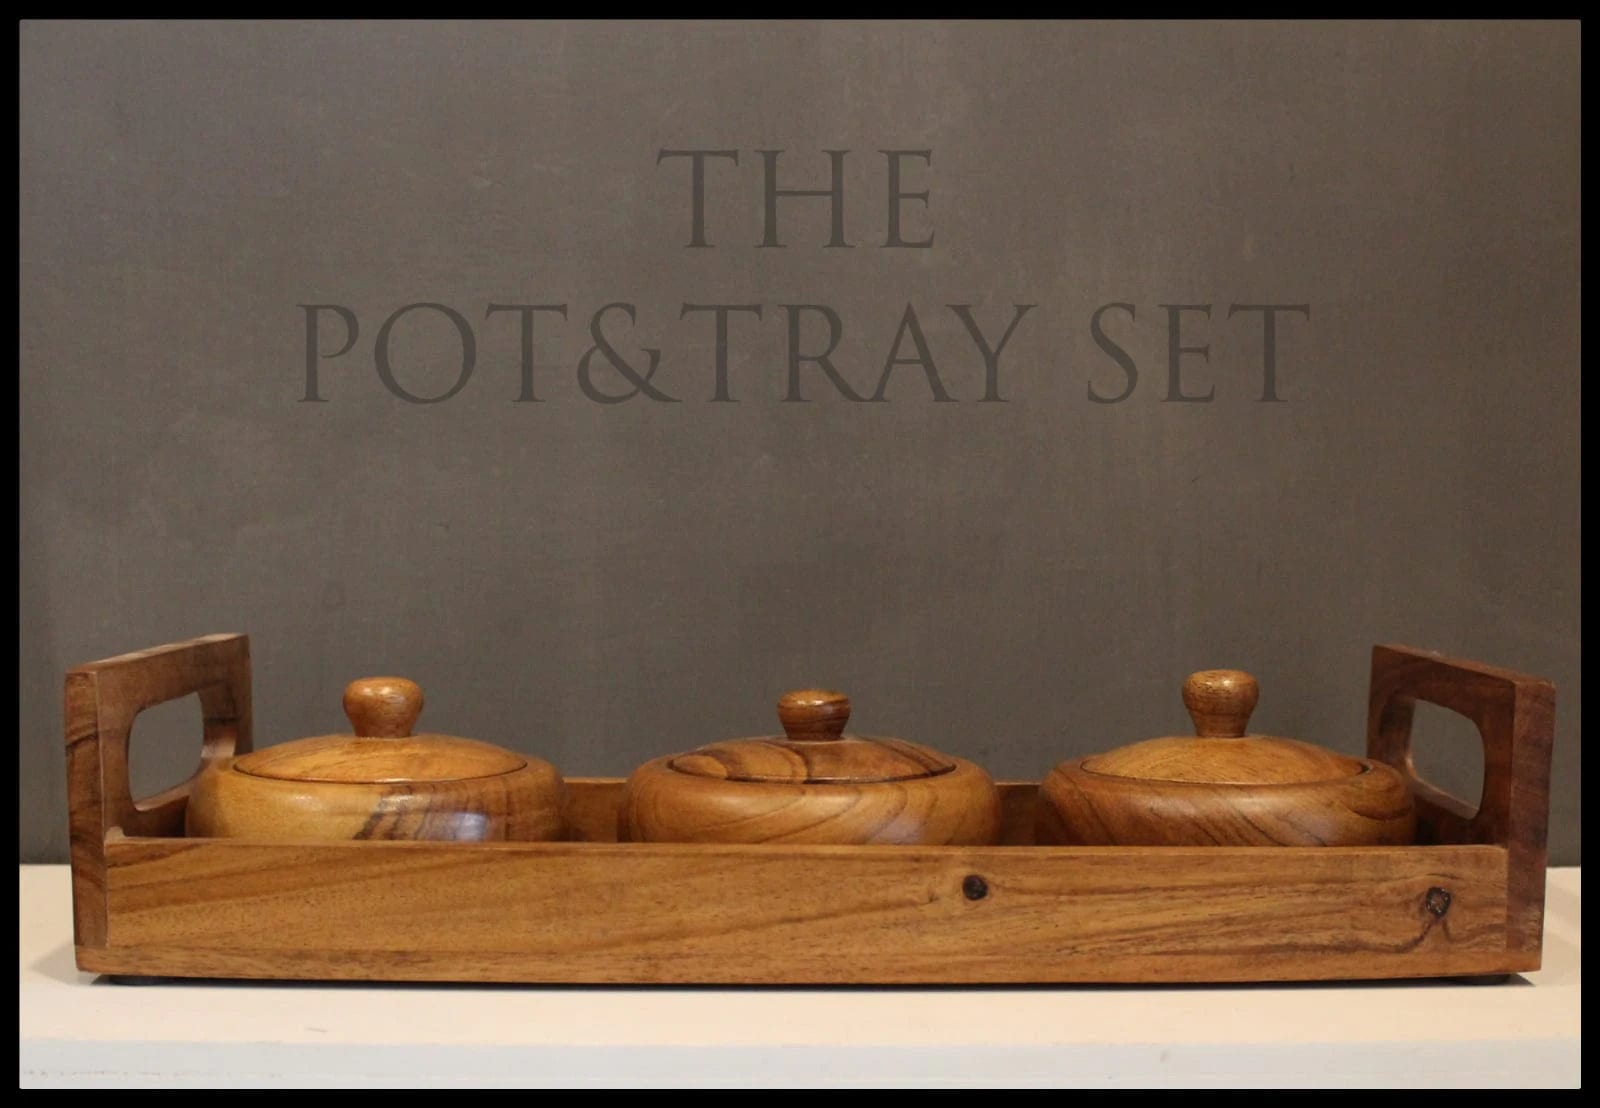 SERVING POTS WITH TRAY II WOODEN REFRESHMENT JARS II WOODEN